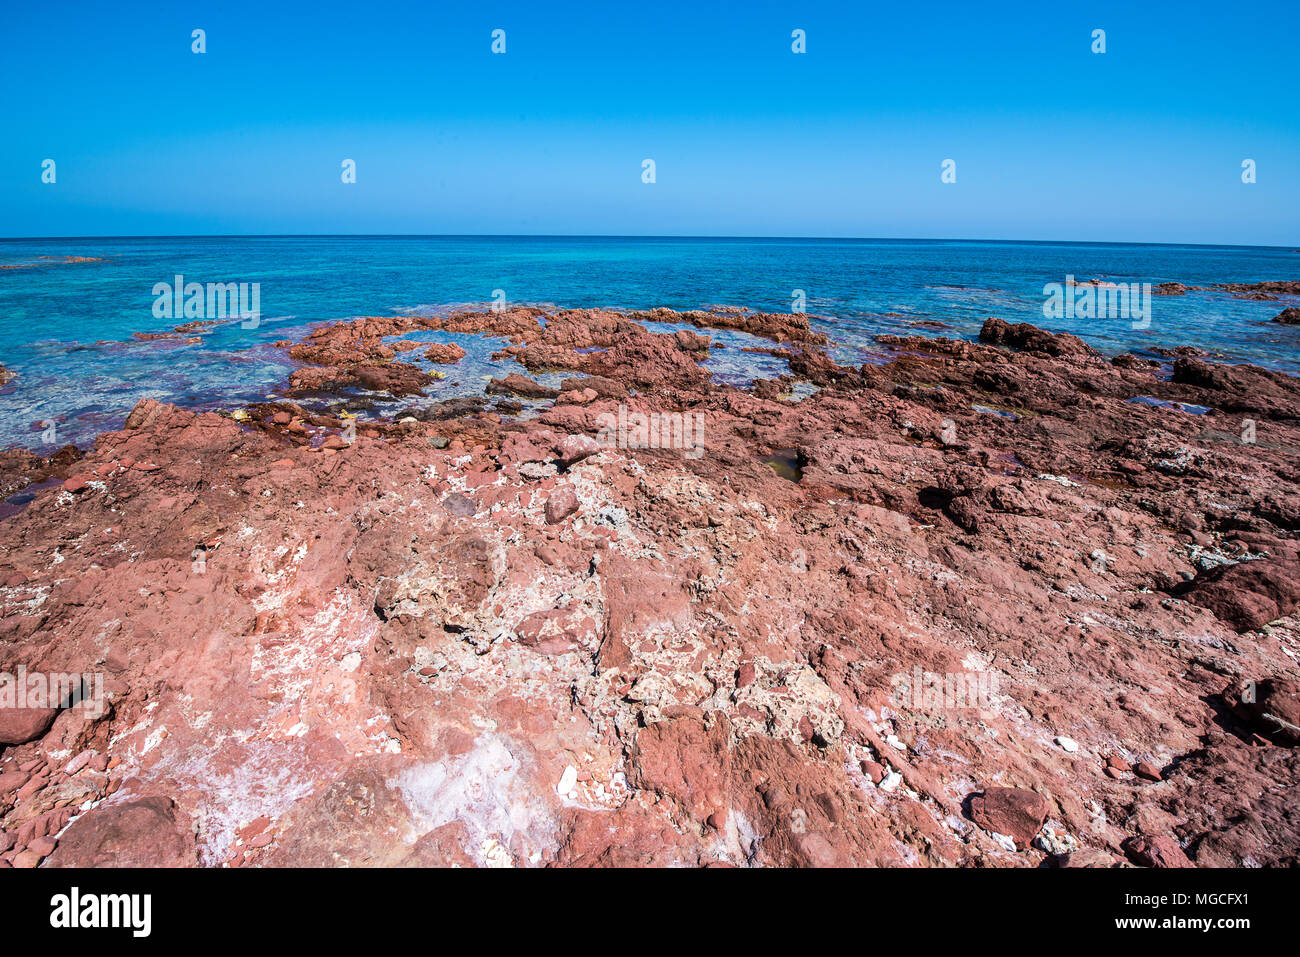 Rock formation of the Socotra Island in Yemen Stock Photo